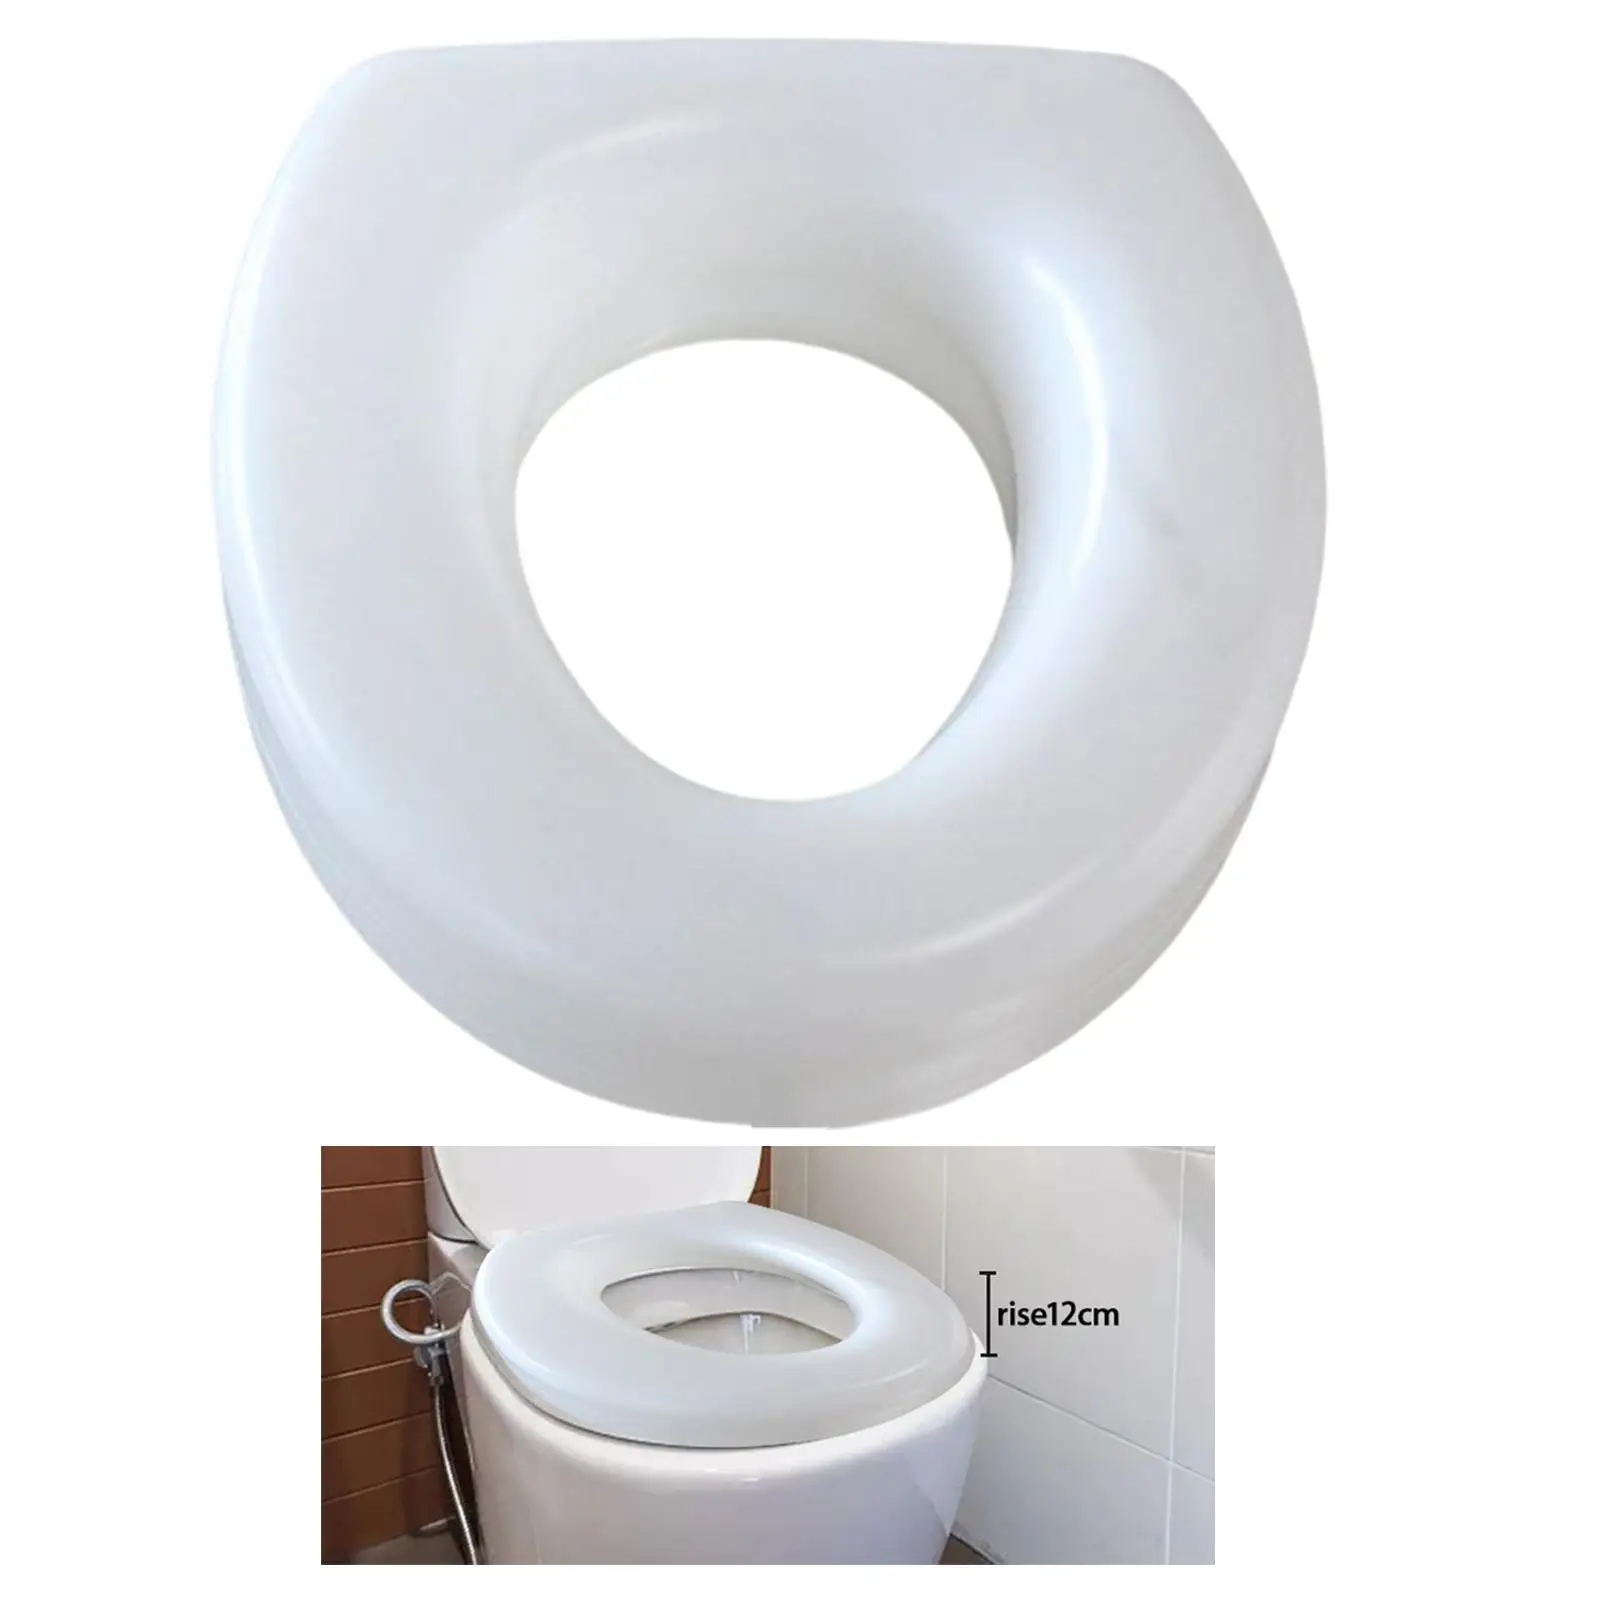 Raised Toilet Seat Assist Device for Assistance Bending or Sitting Durable